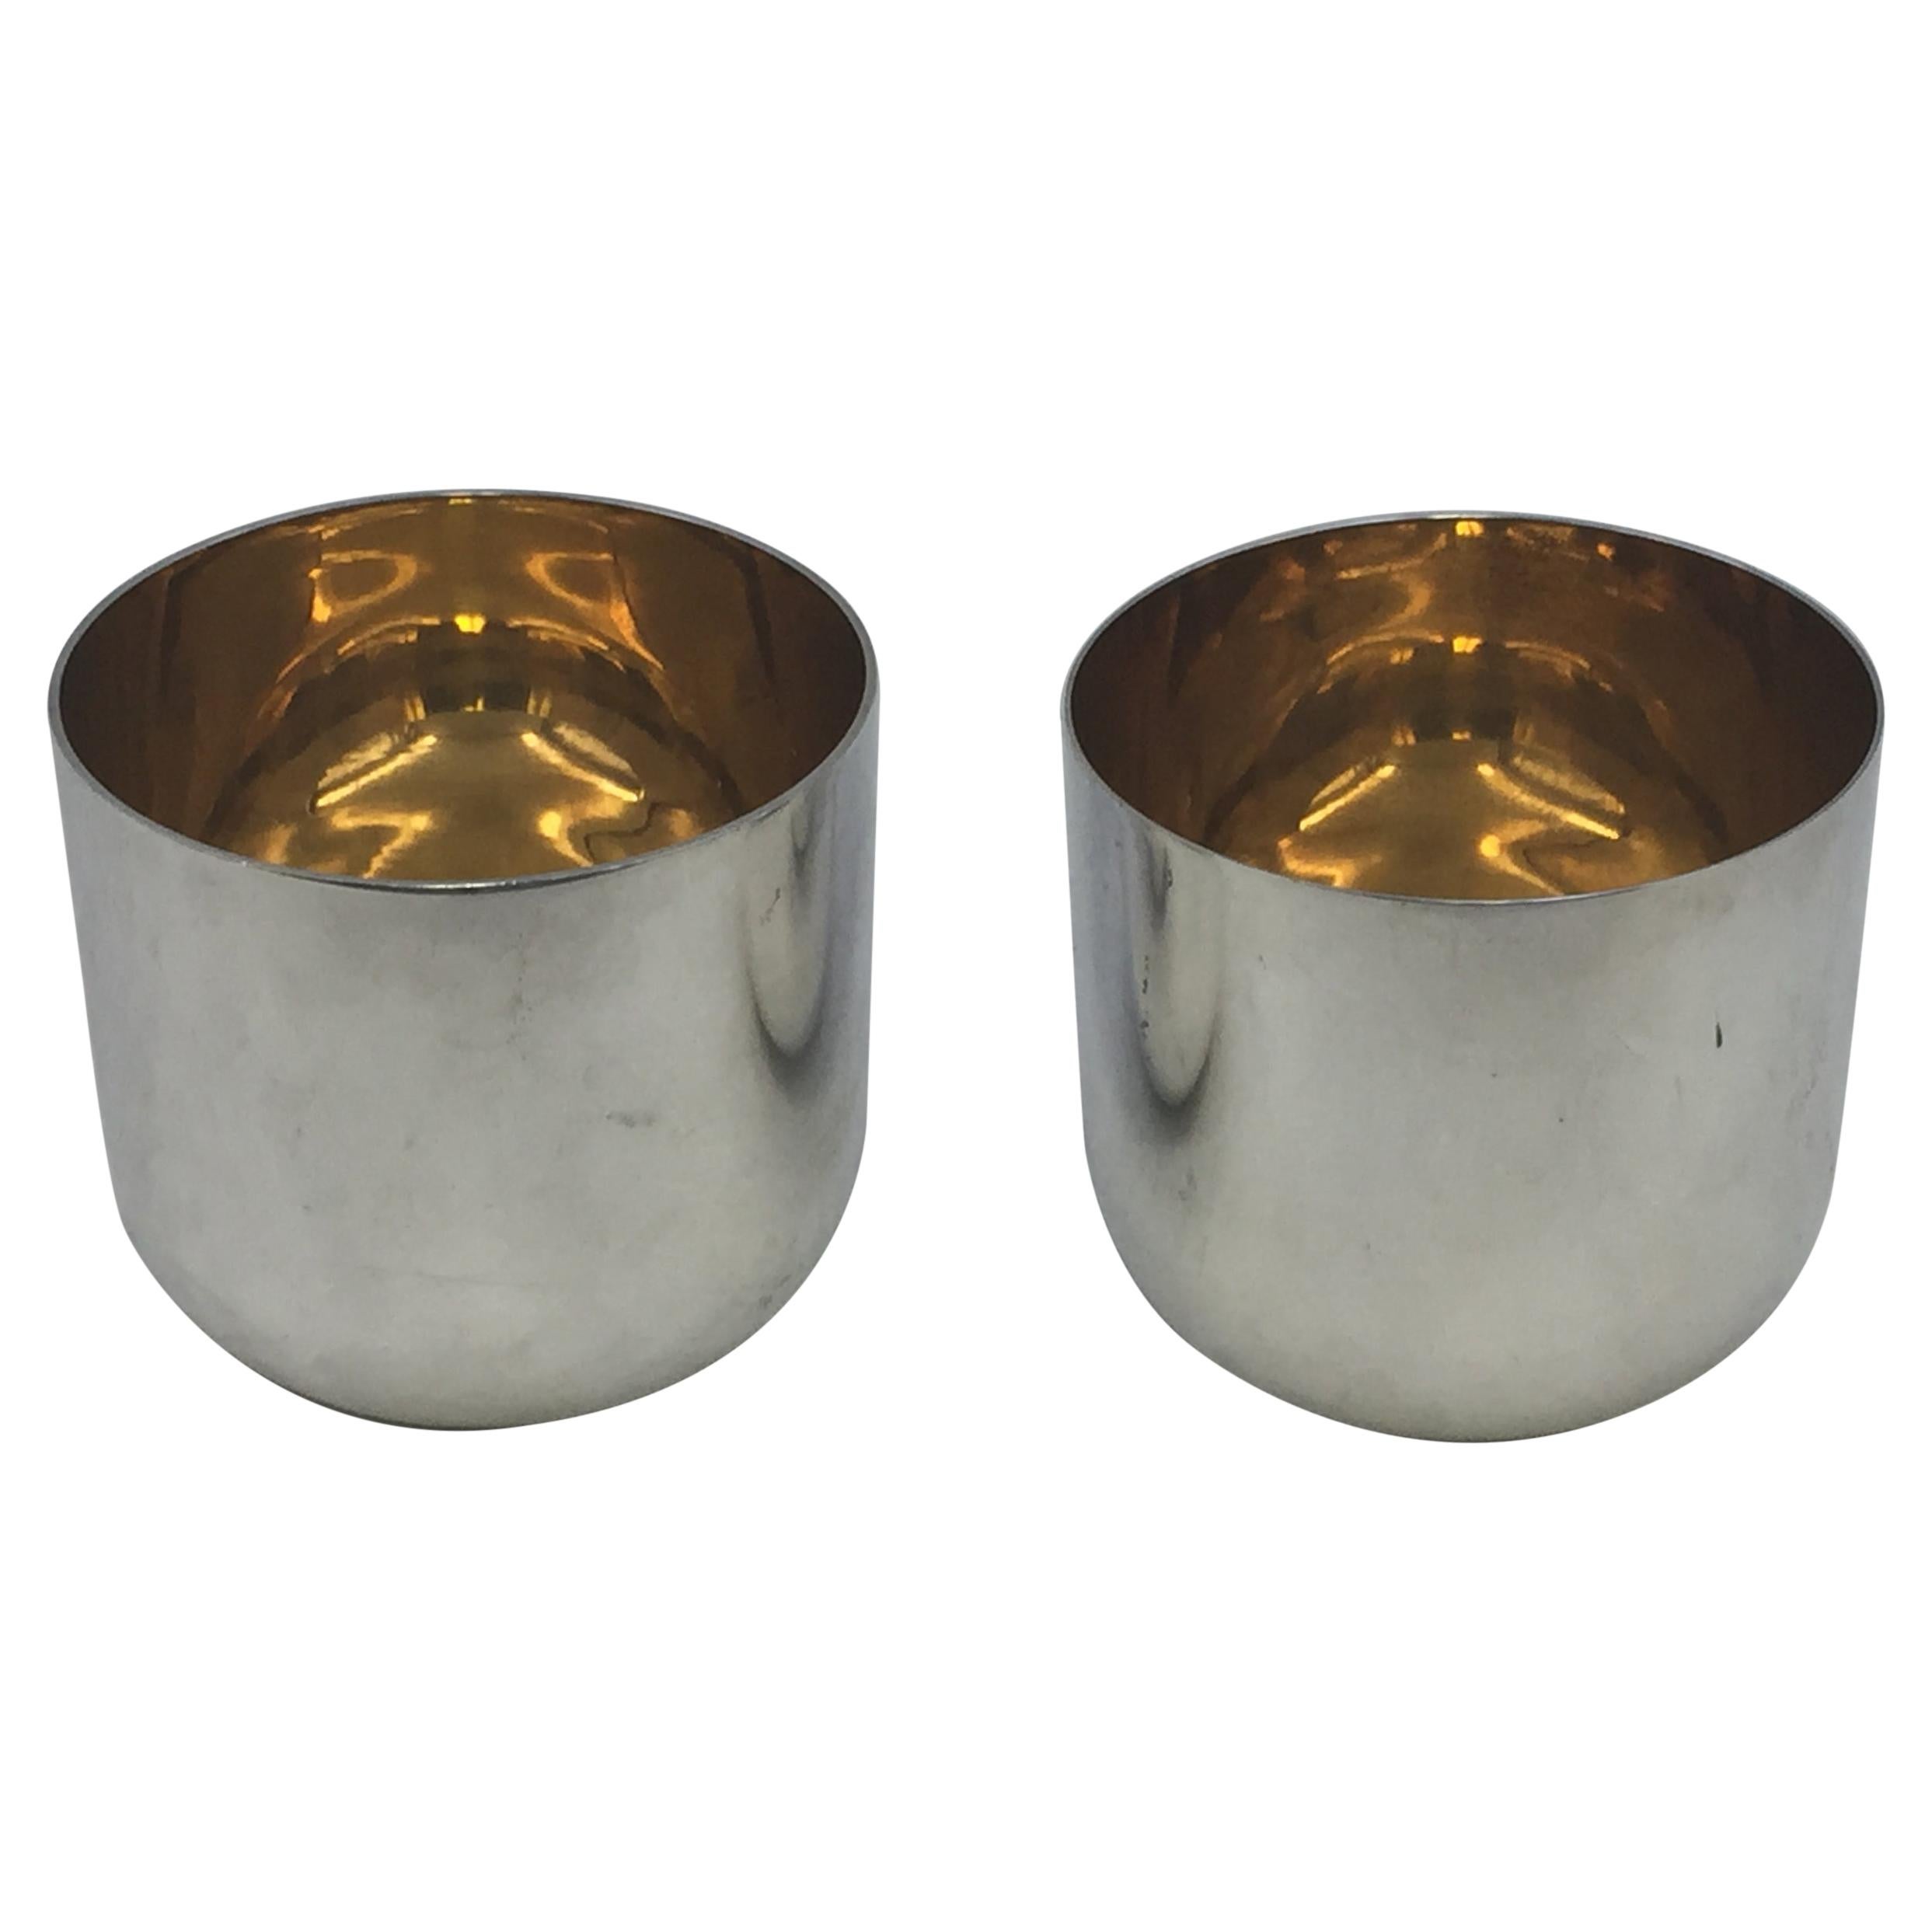 Pair of Buccellati Gilt Sterling Silver Cups